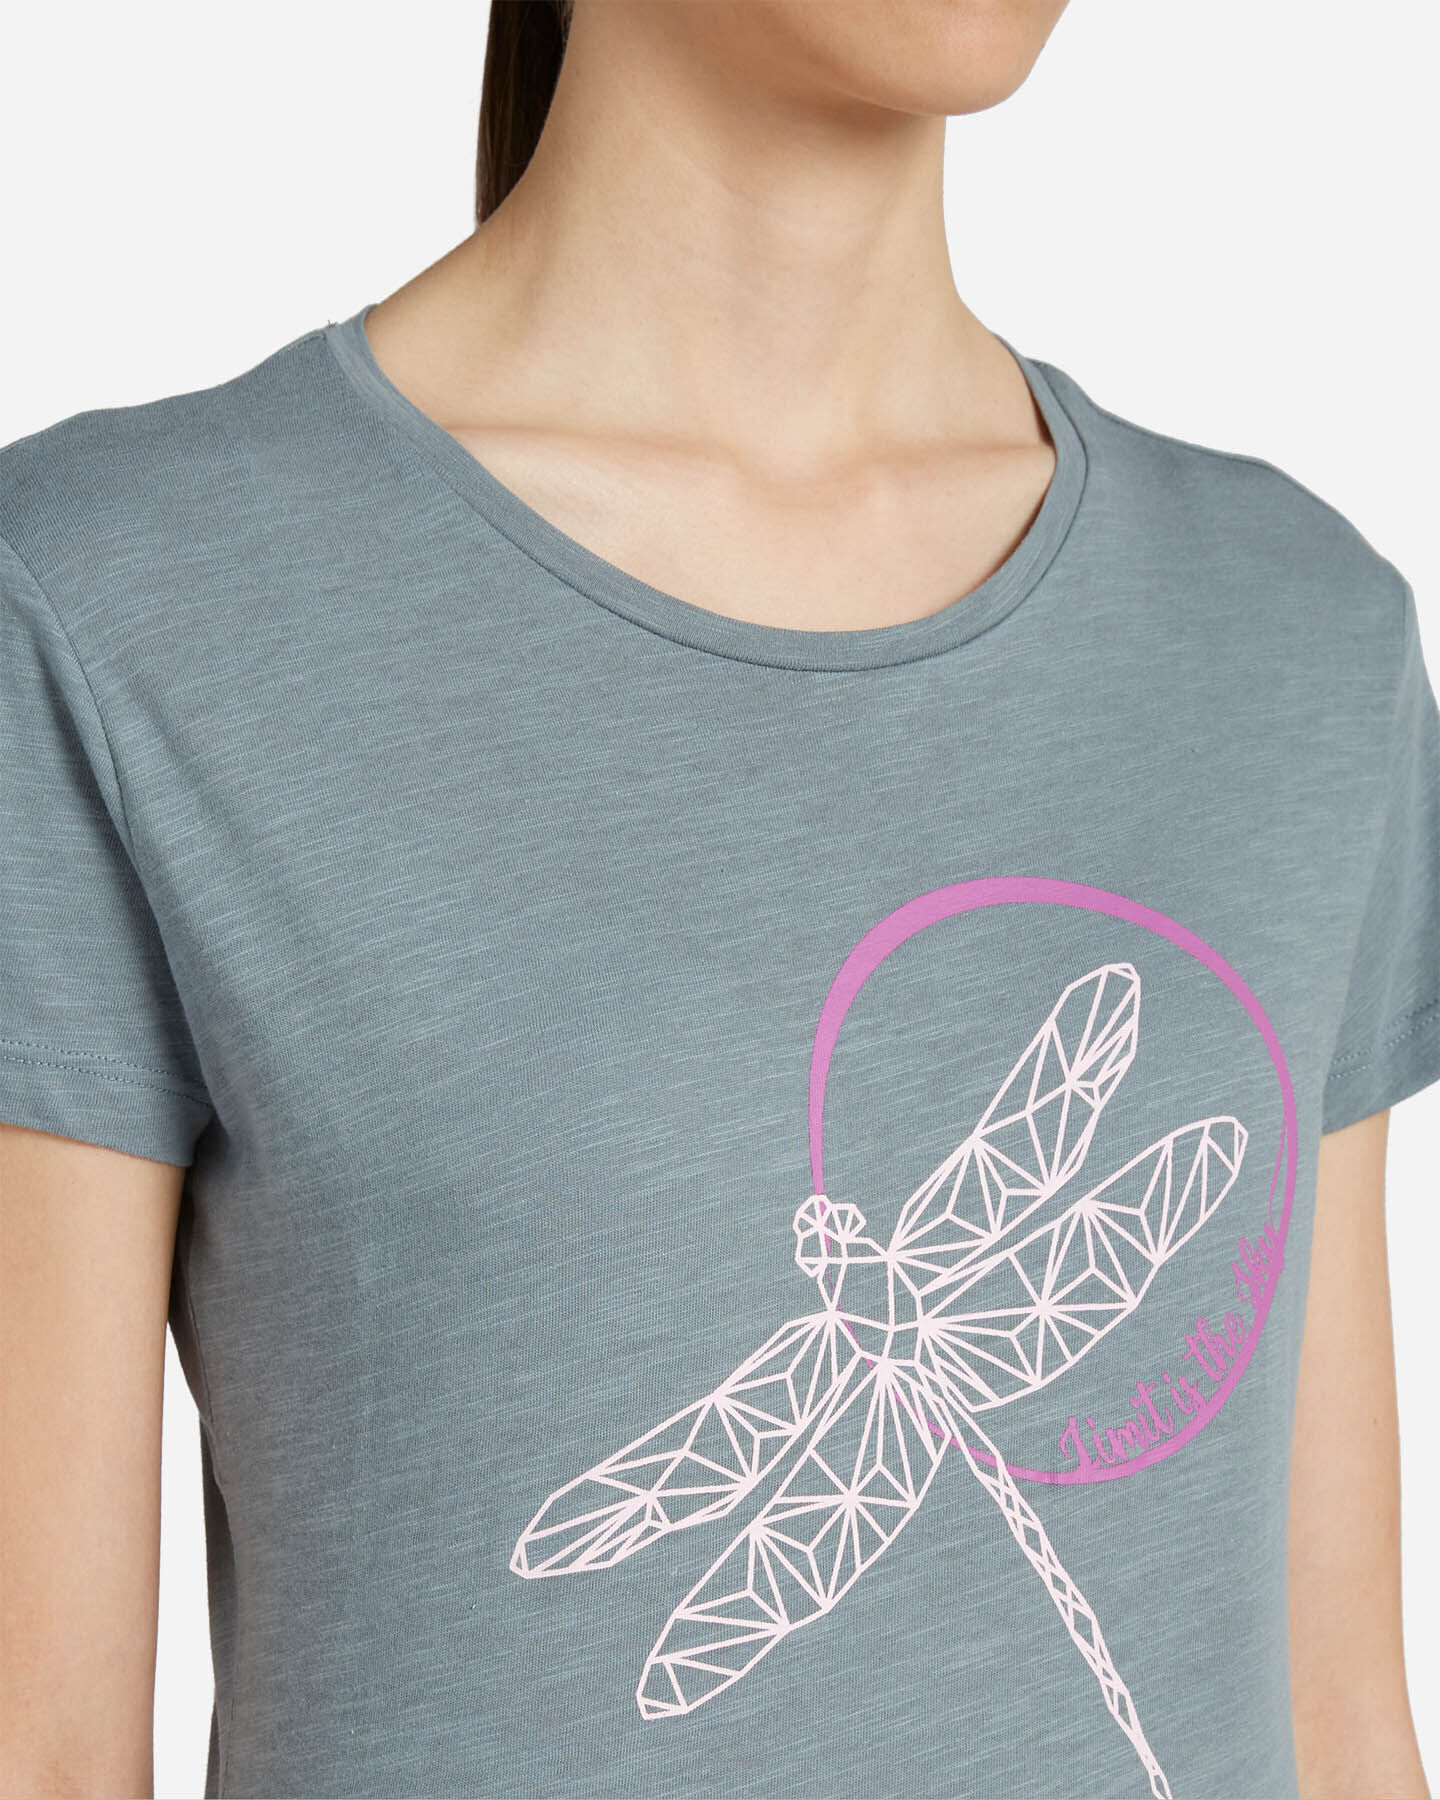  T-Shirt 8848 DRAGONFLY W S4101755|1122/2217A|XS scatto 4